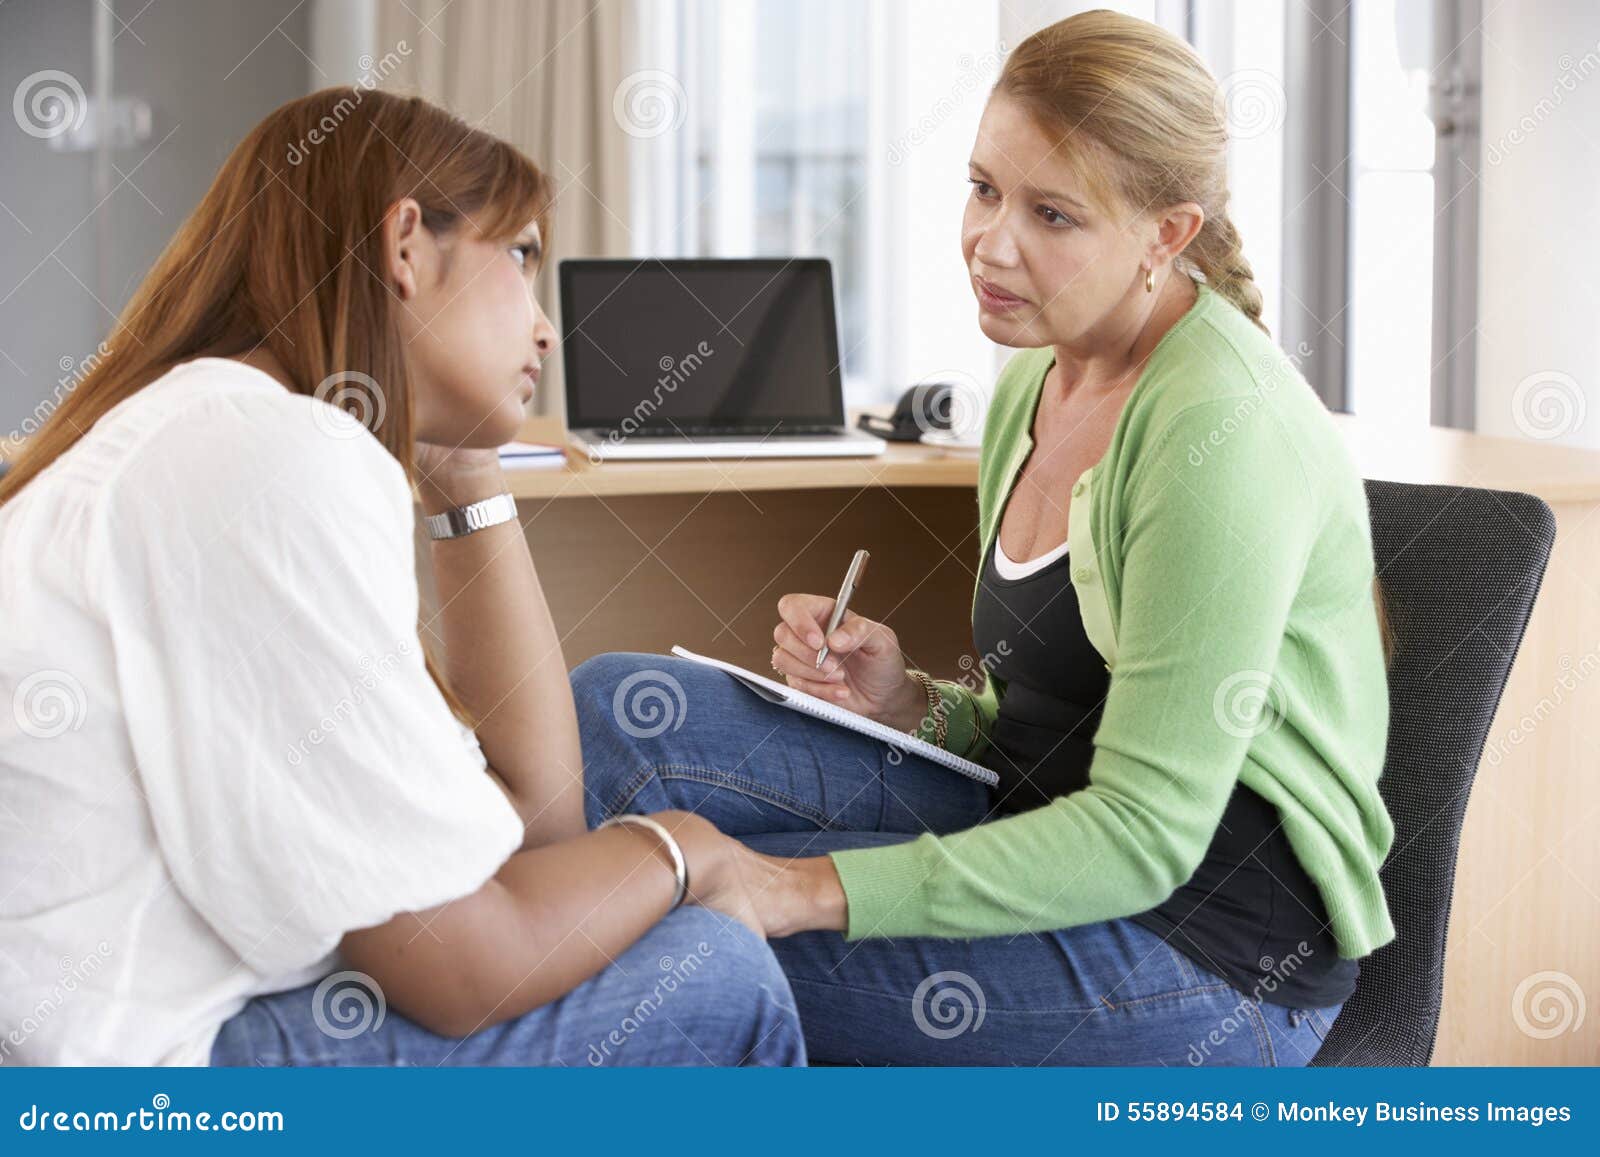 young woman having counselling session